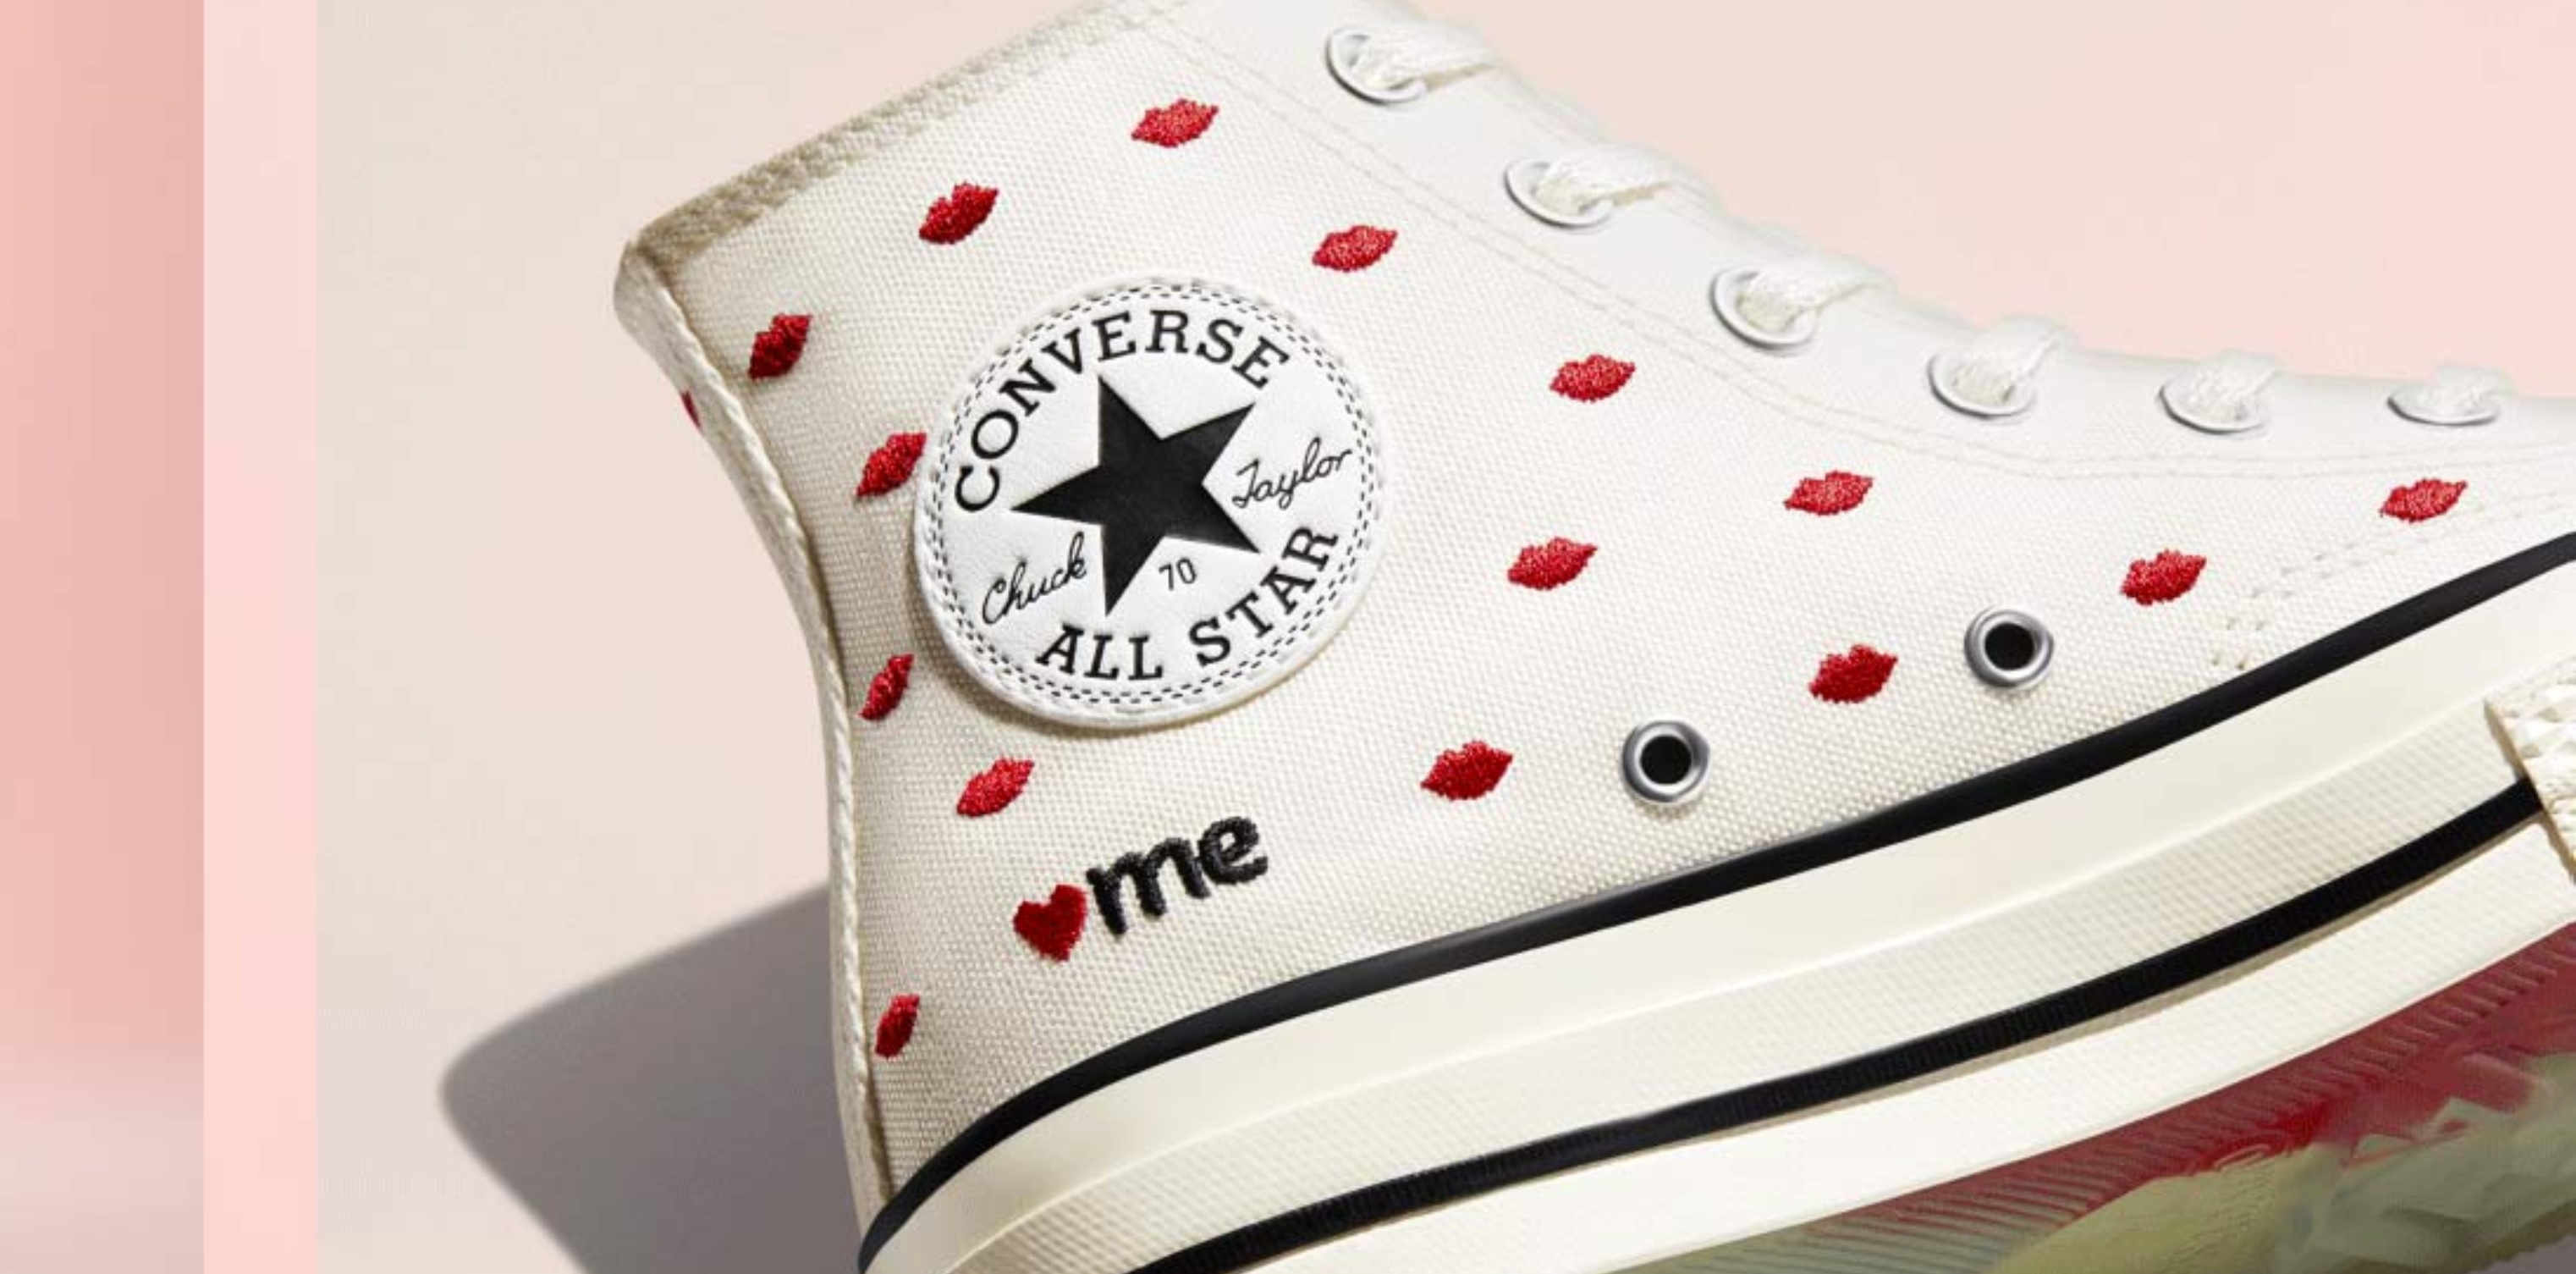 The Converse Valentine's Day Collection debuts 42 styles that 9to5Toys